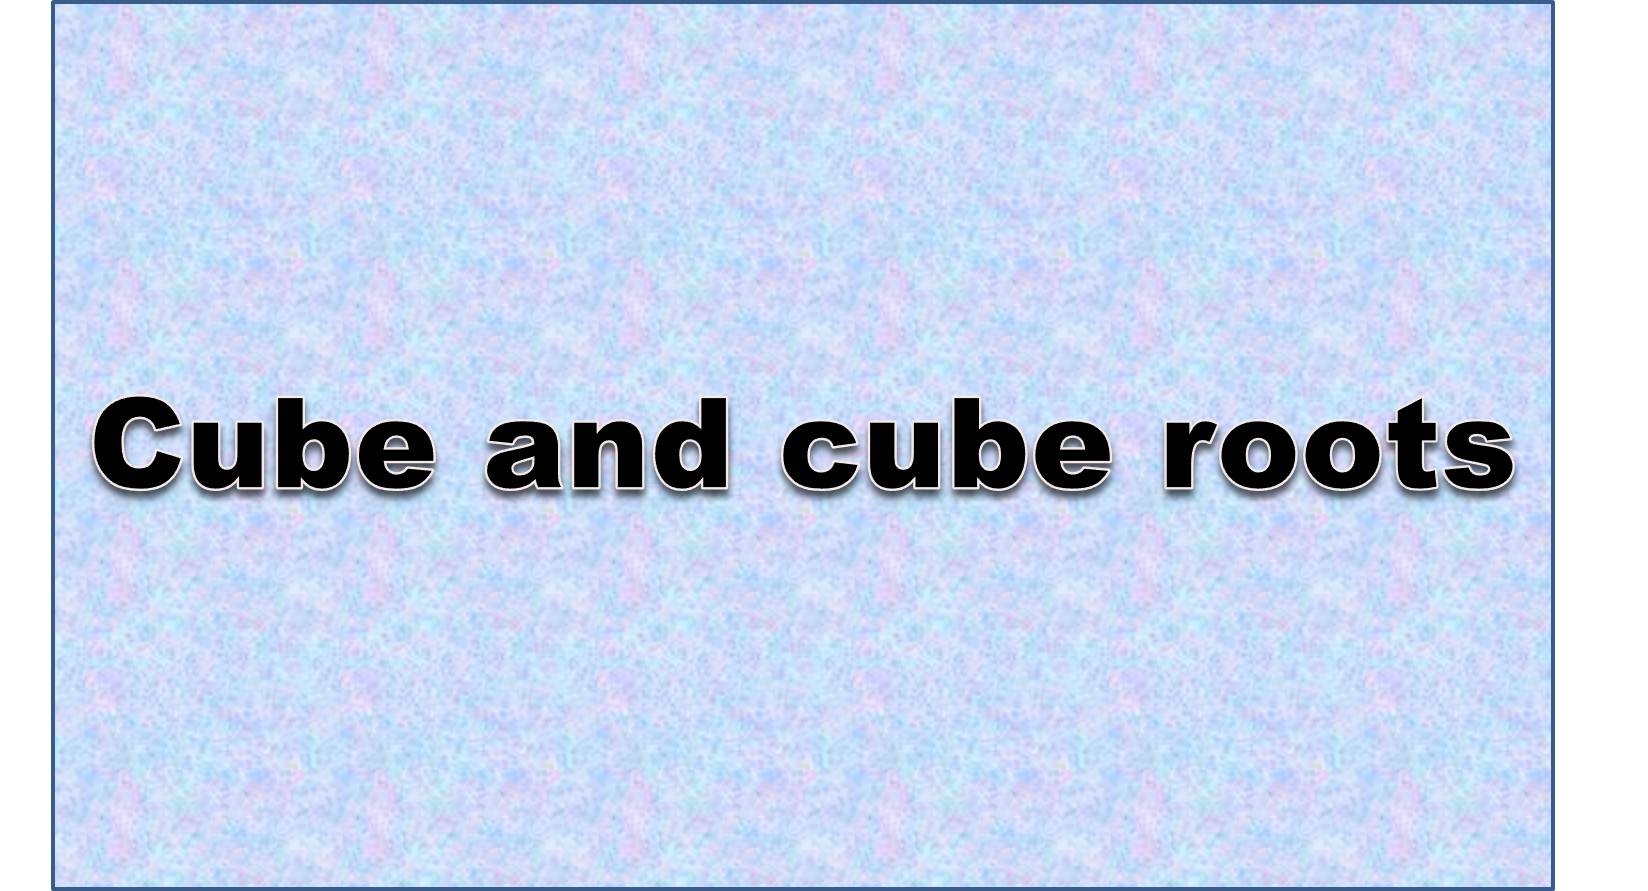 http://study.aisectonline.com/images/Intro to cube roots.jpg